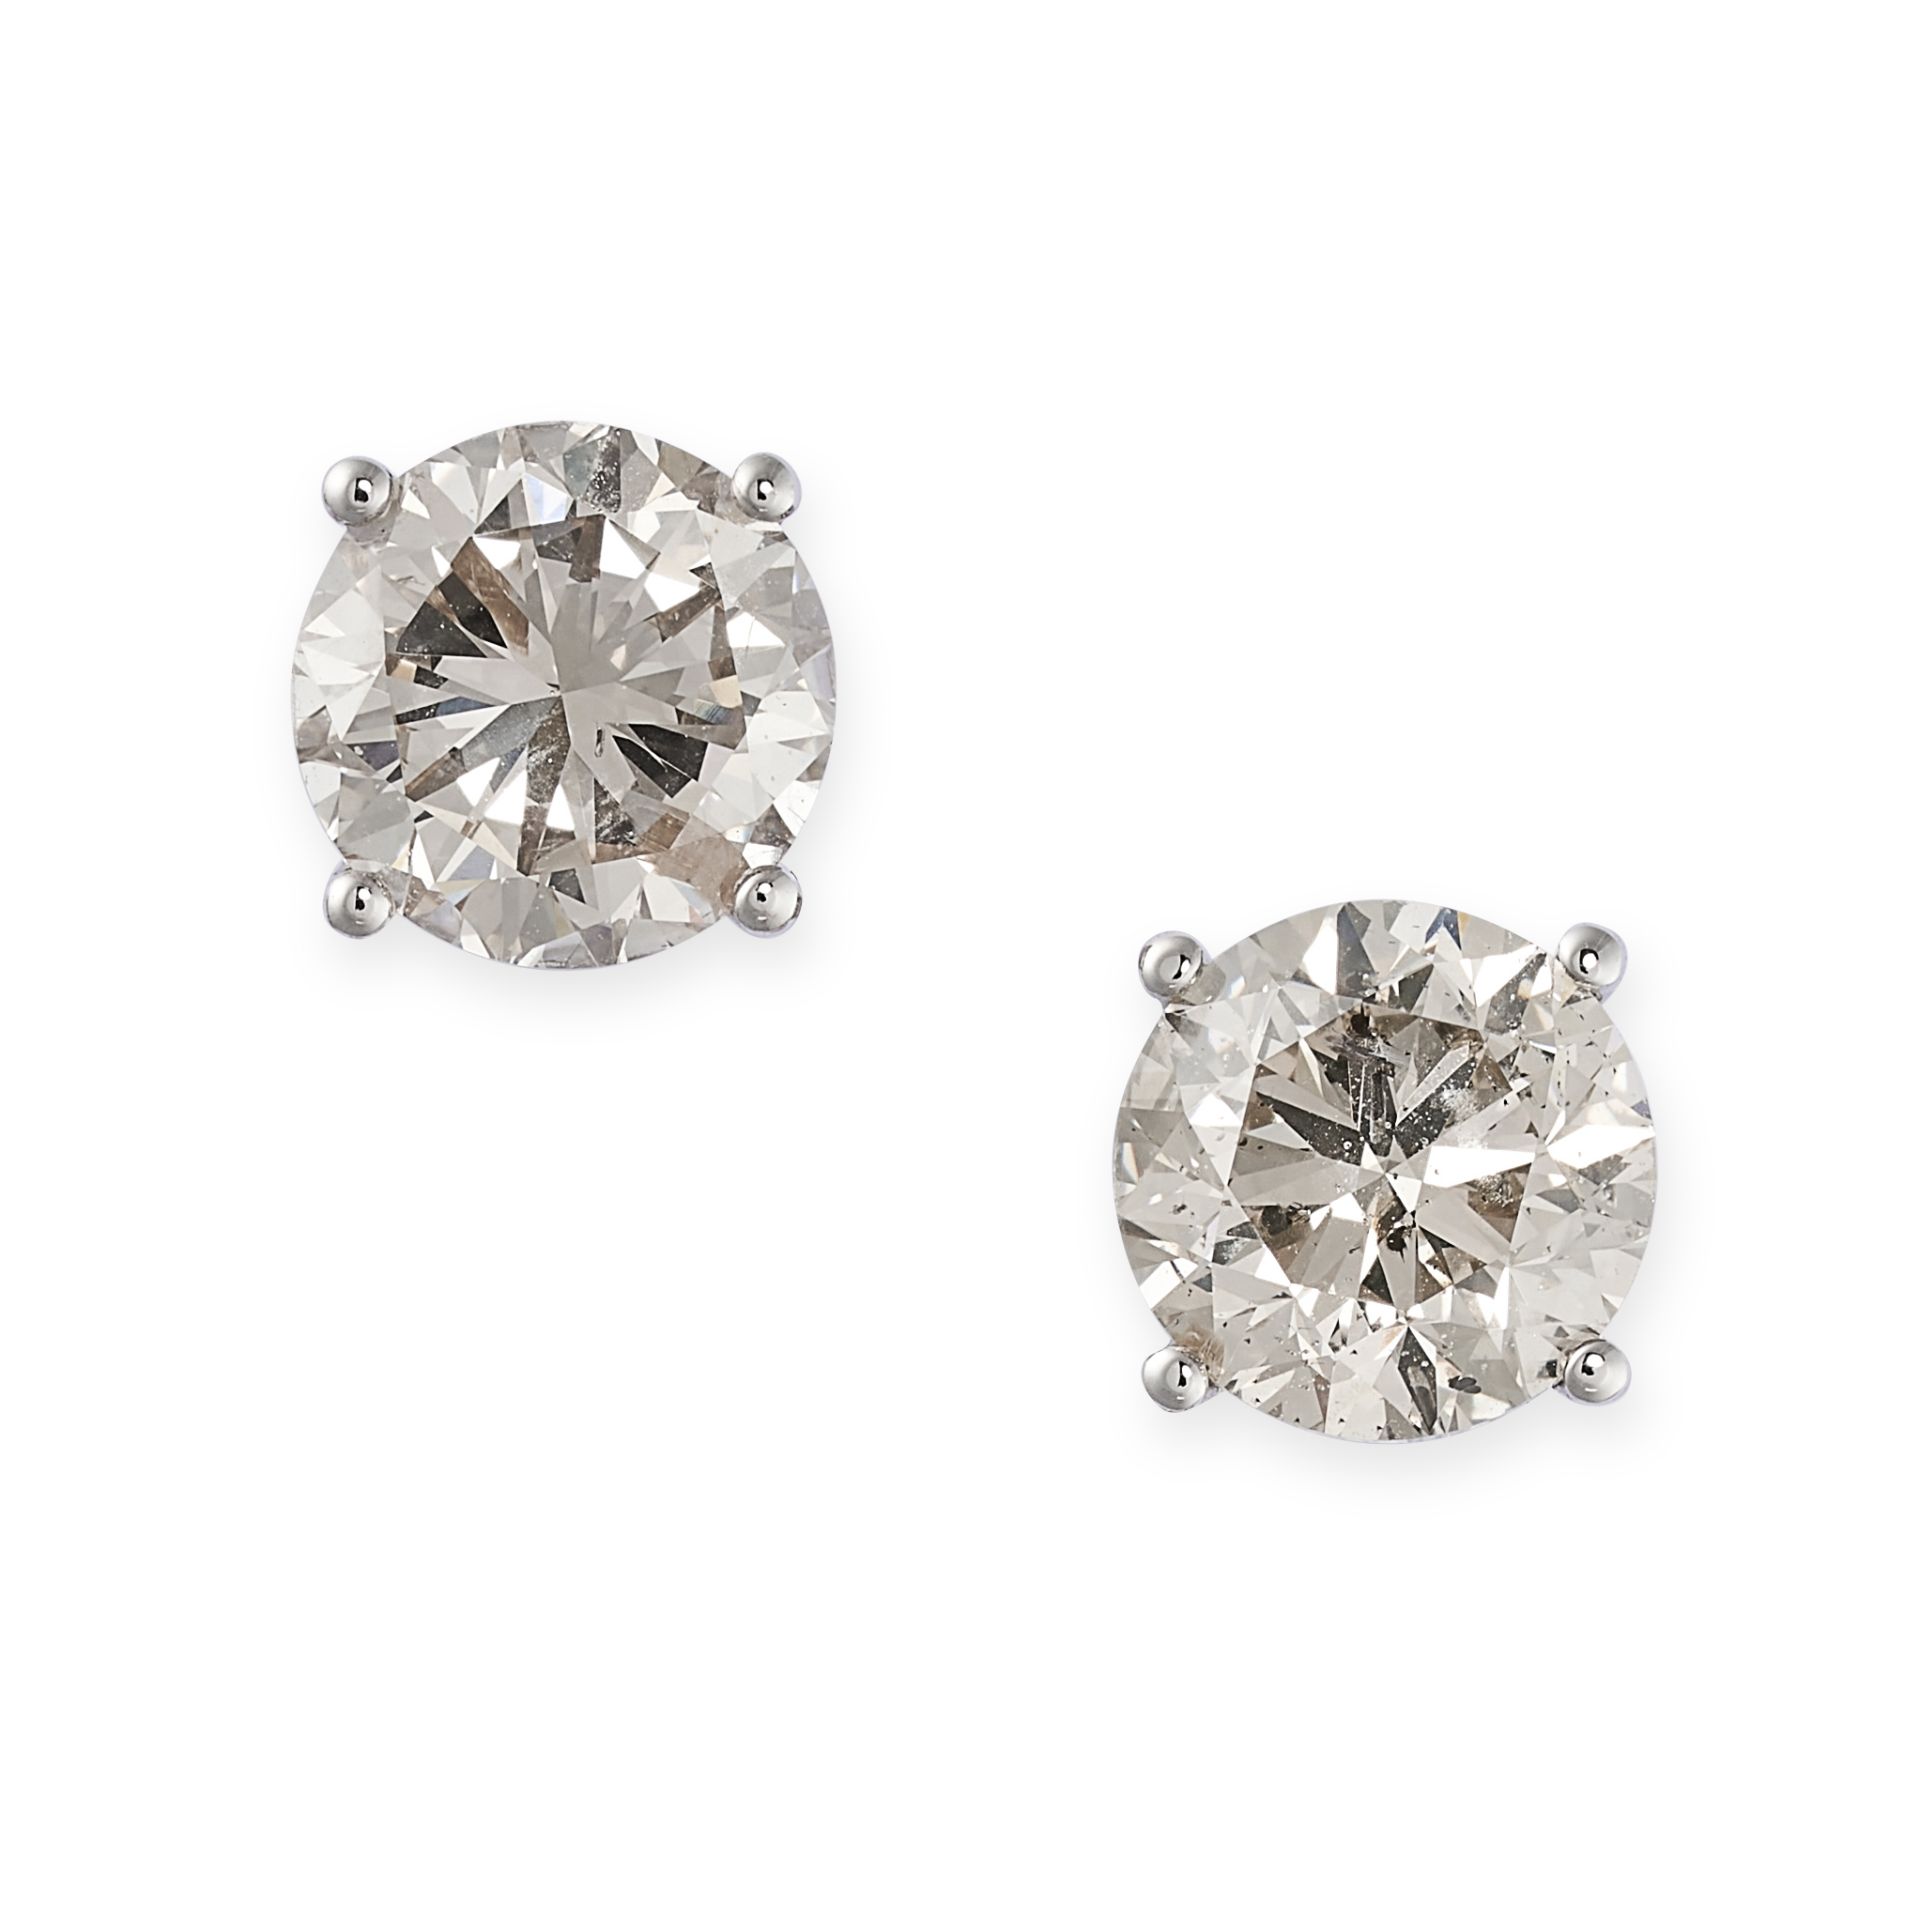 A PAIR OF SOLITAIRE DIAMOND STUD EARRINGS in 18ct white gold, each set with a round brilliant cut